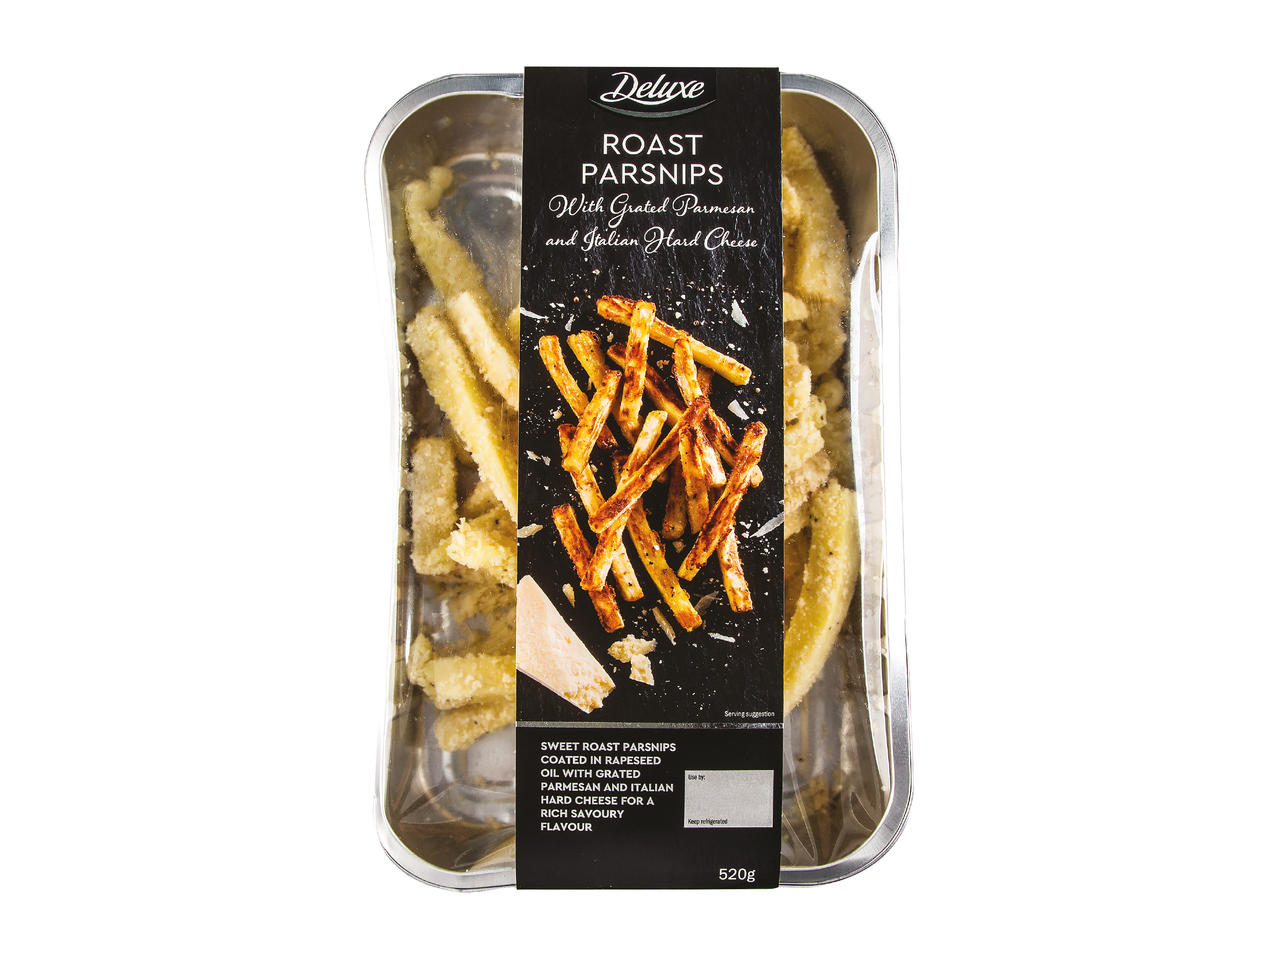 Roasting Parsnips with parmesan cheese